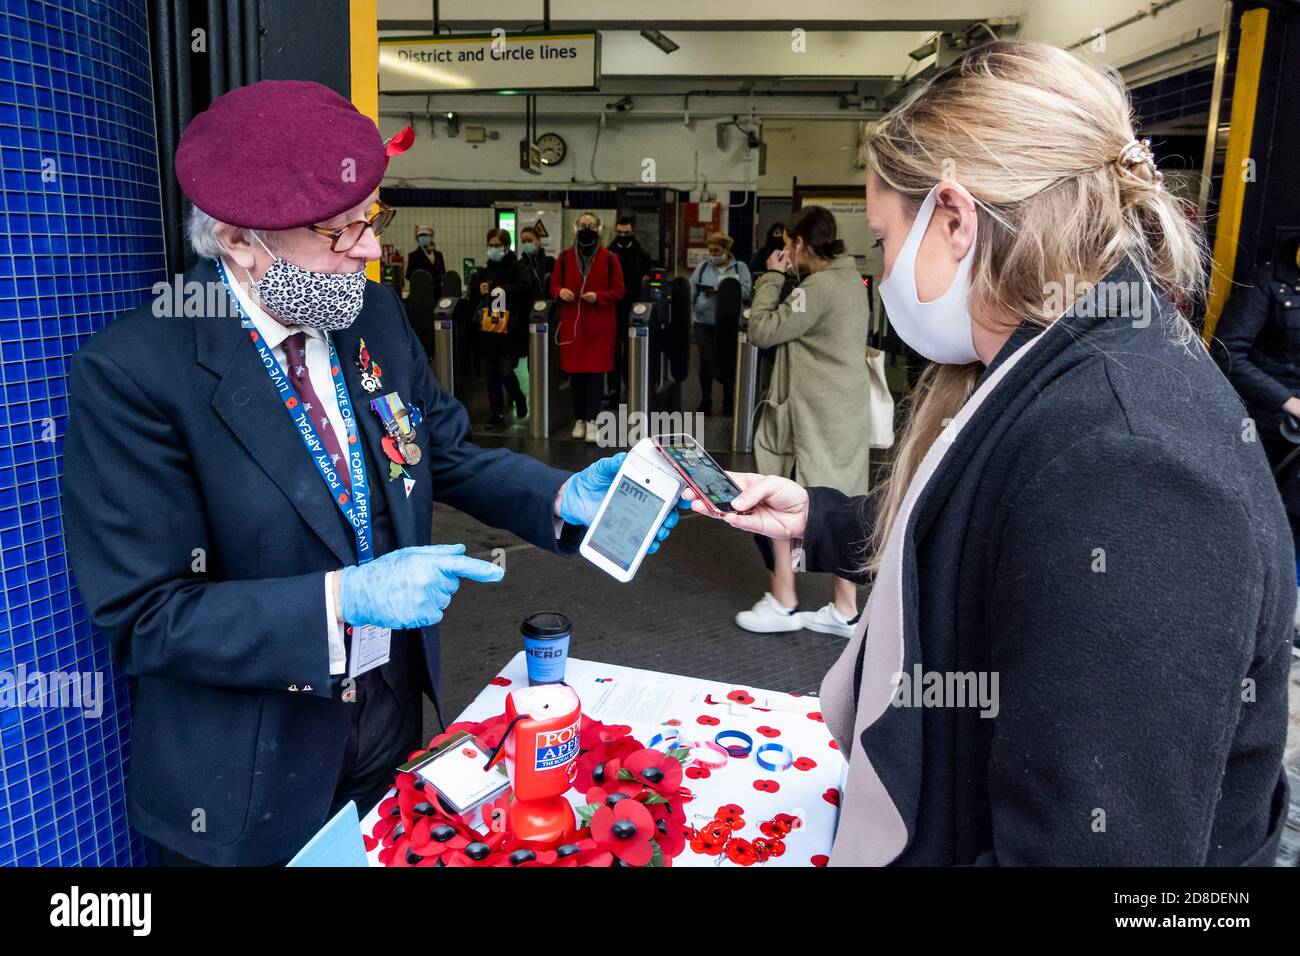 London, UK. 29th Oct, 2020. It is London Poppy Day and a veteran (in the high risk covid age group) of Airborne forces, in his red beret, collects for the Royal British Legion, as a steady flow of passengers exits Sloane Square Tube Station. He wears a mask and gloves and mostly collects funds using contactless payments (although he still has a 'tin' for cash). Travellers mostly wear masks after they become mandatory. Credit: Guy Bell/Alamy Live News Stock Photo